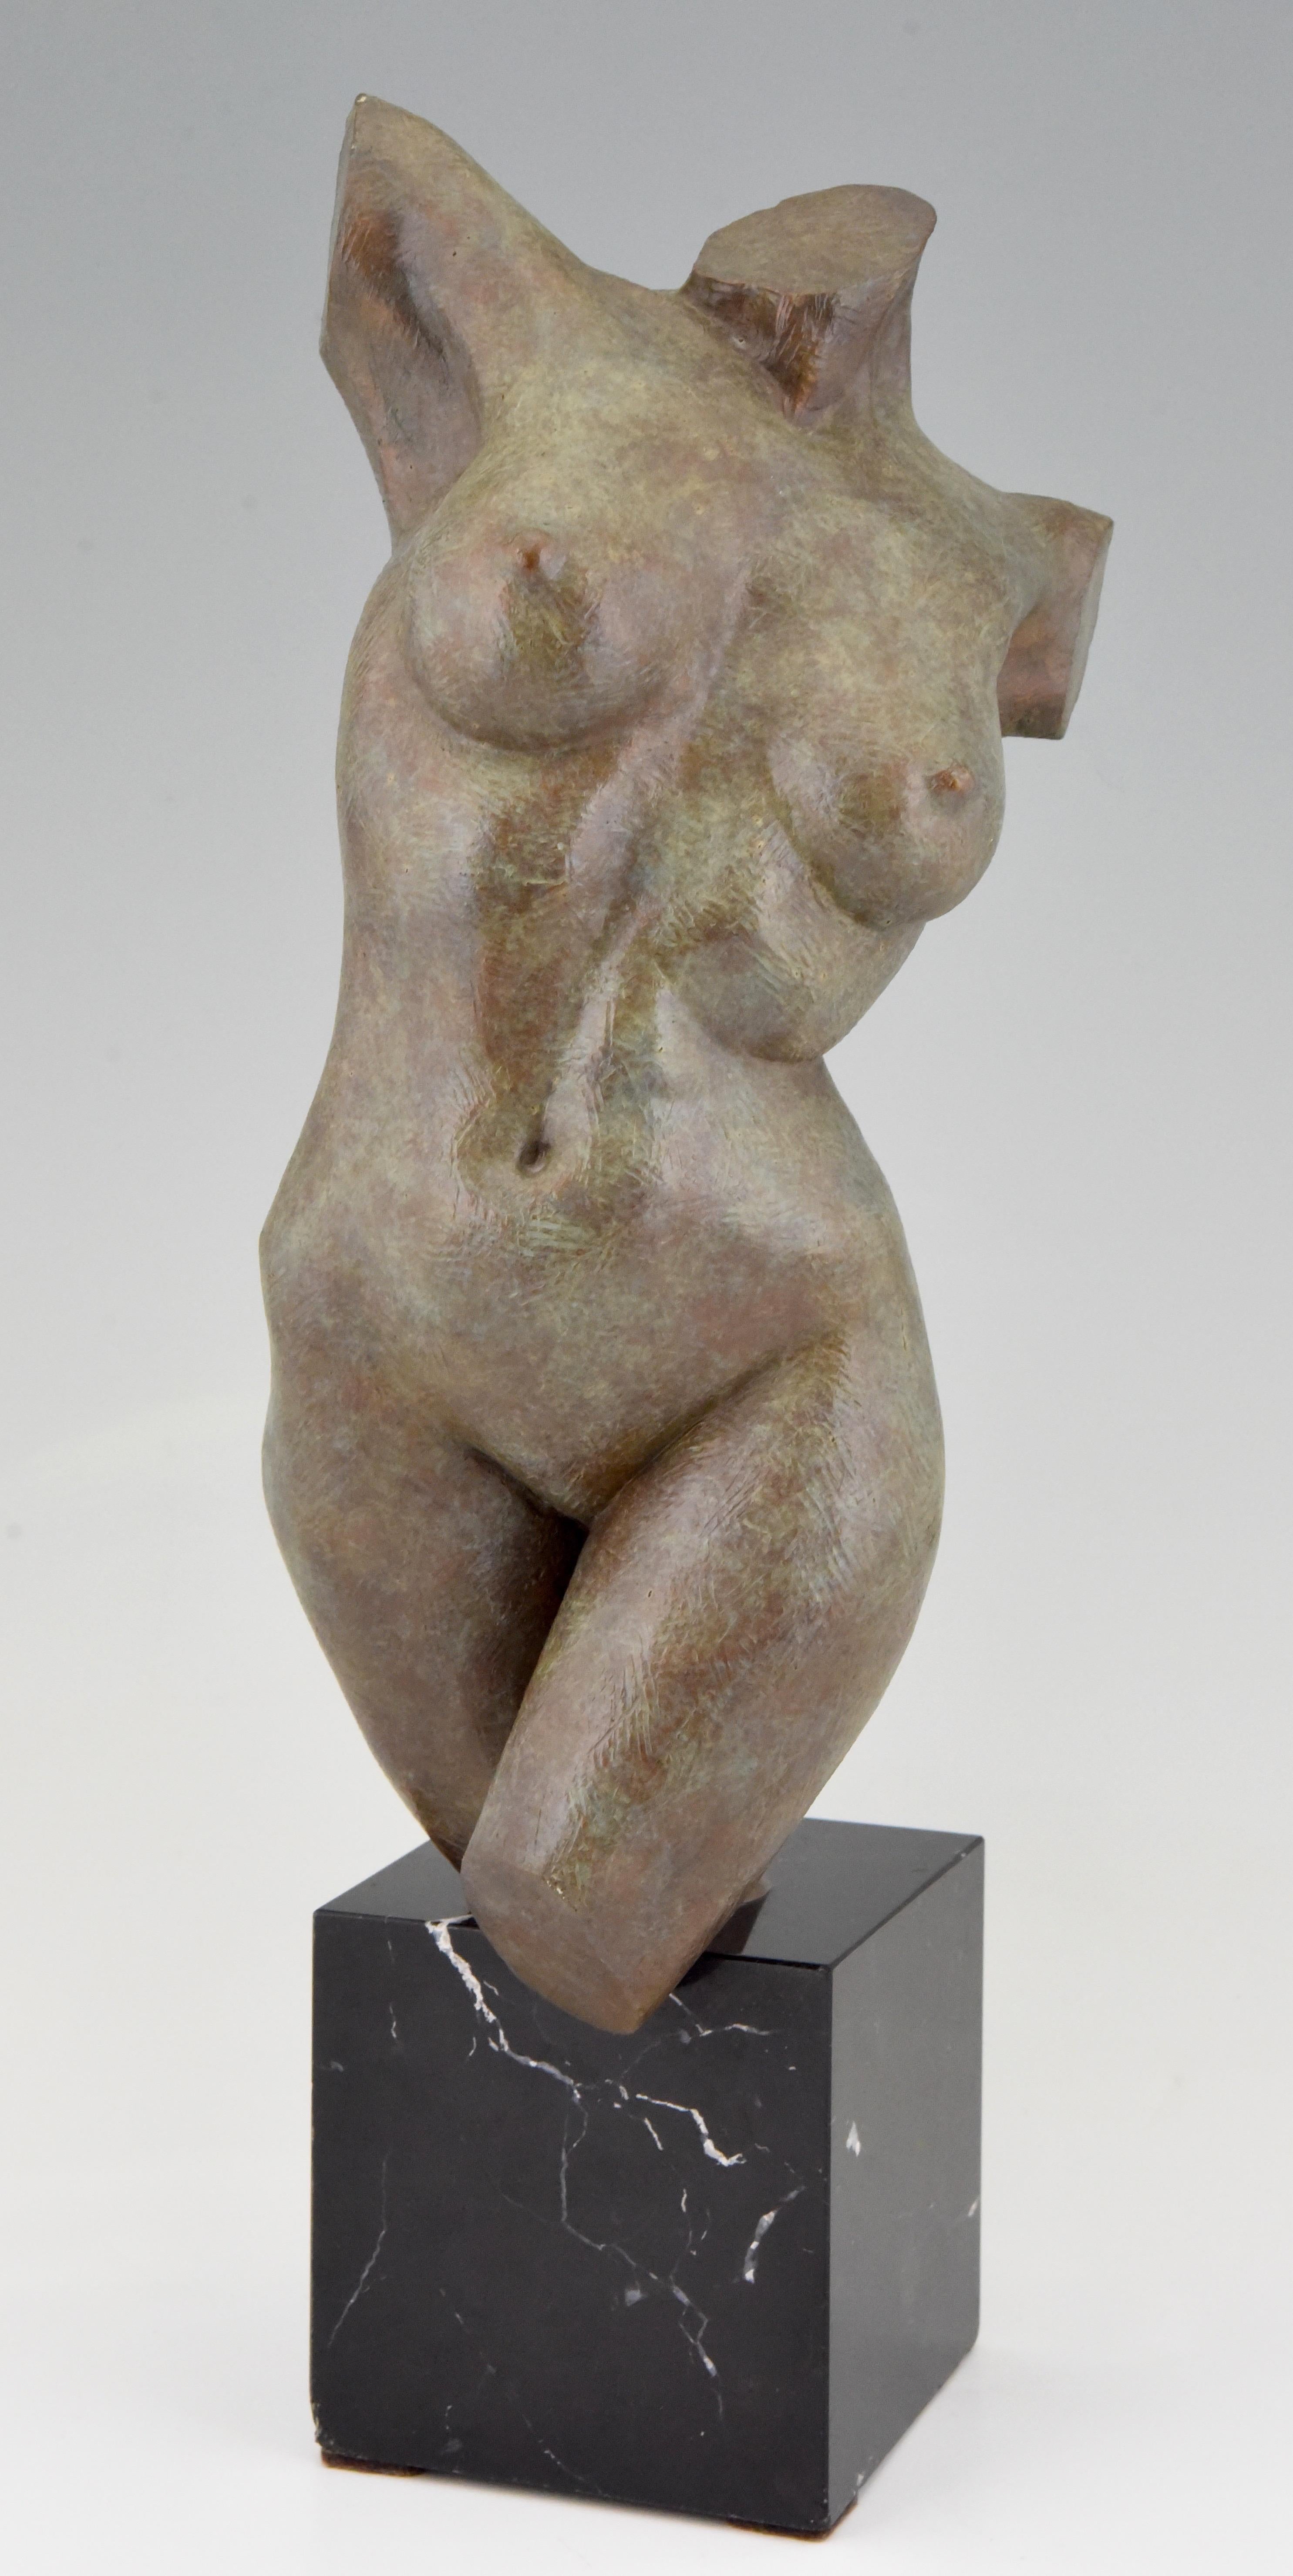 Modern bronze sculpture of a female torso by the American artist Lena Olson. The bronze is numbered and dated 1997. The patinated bronze stands on a marble base.